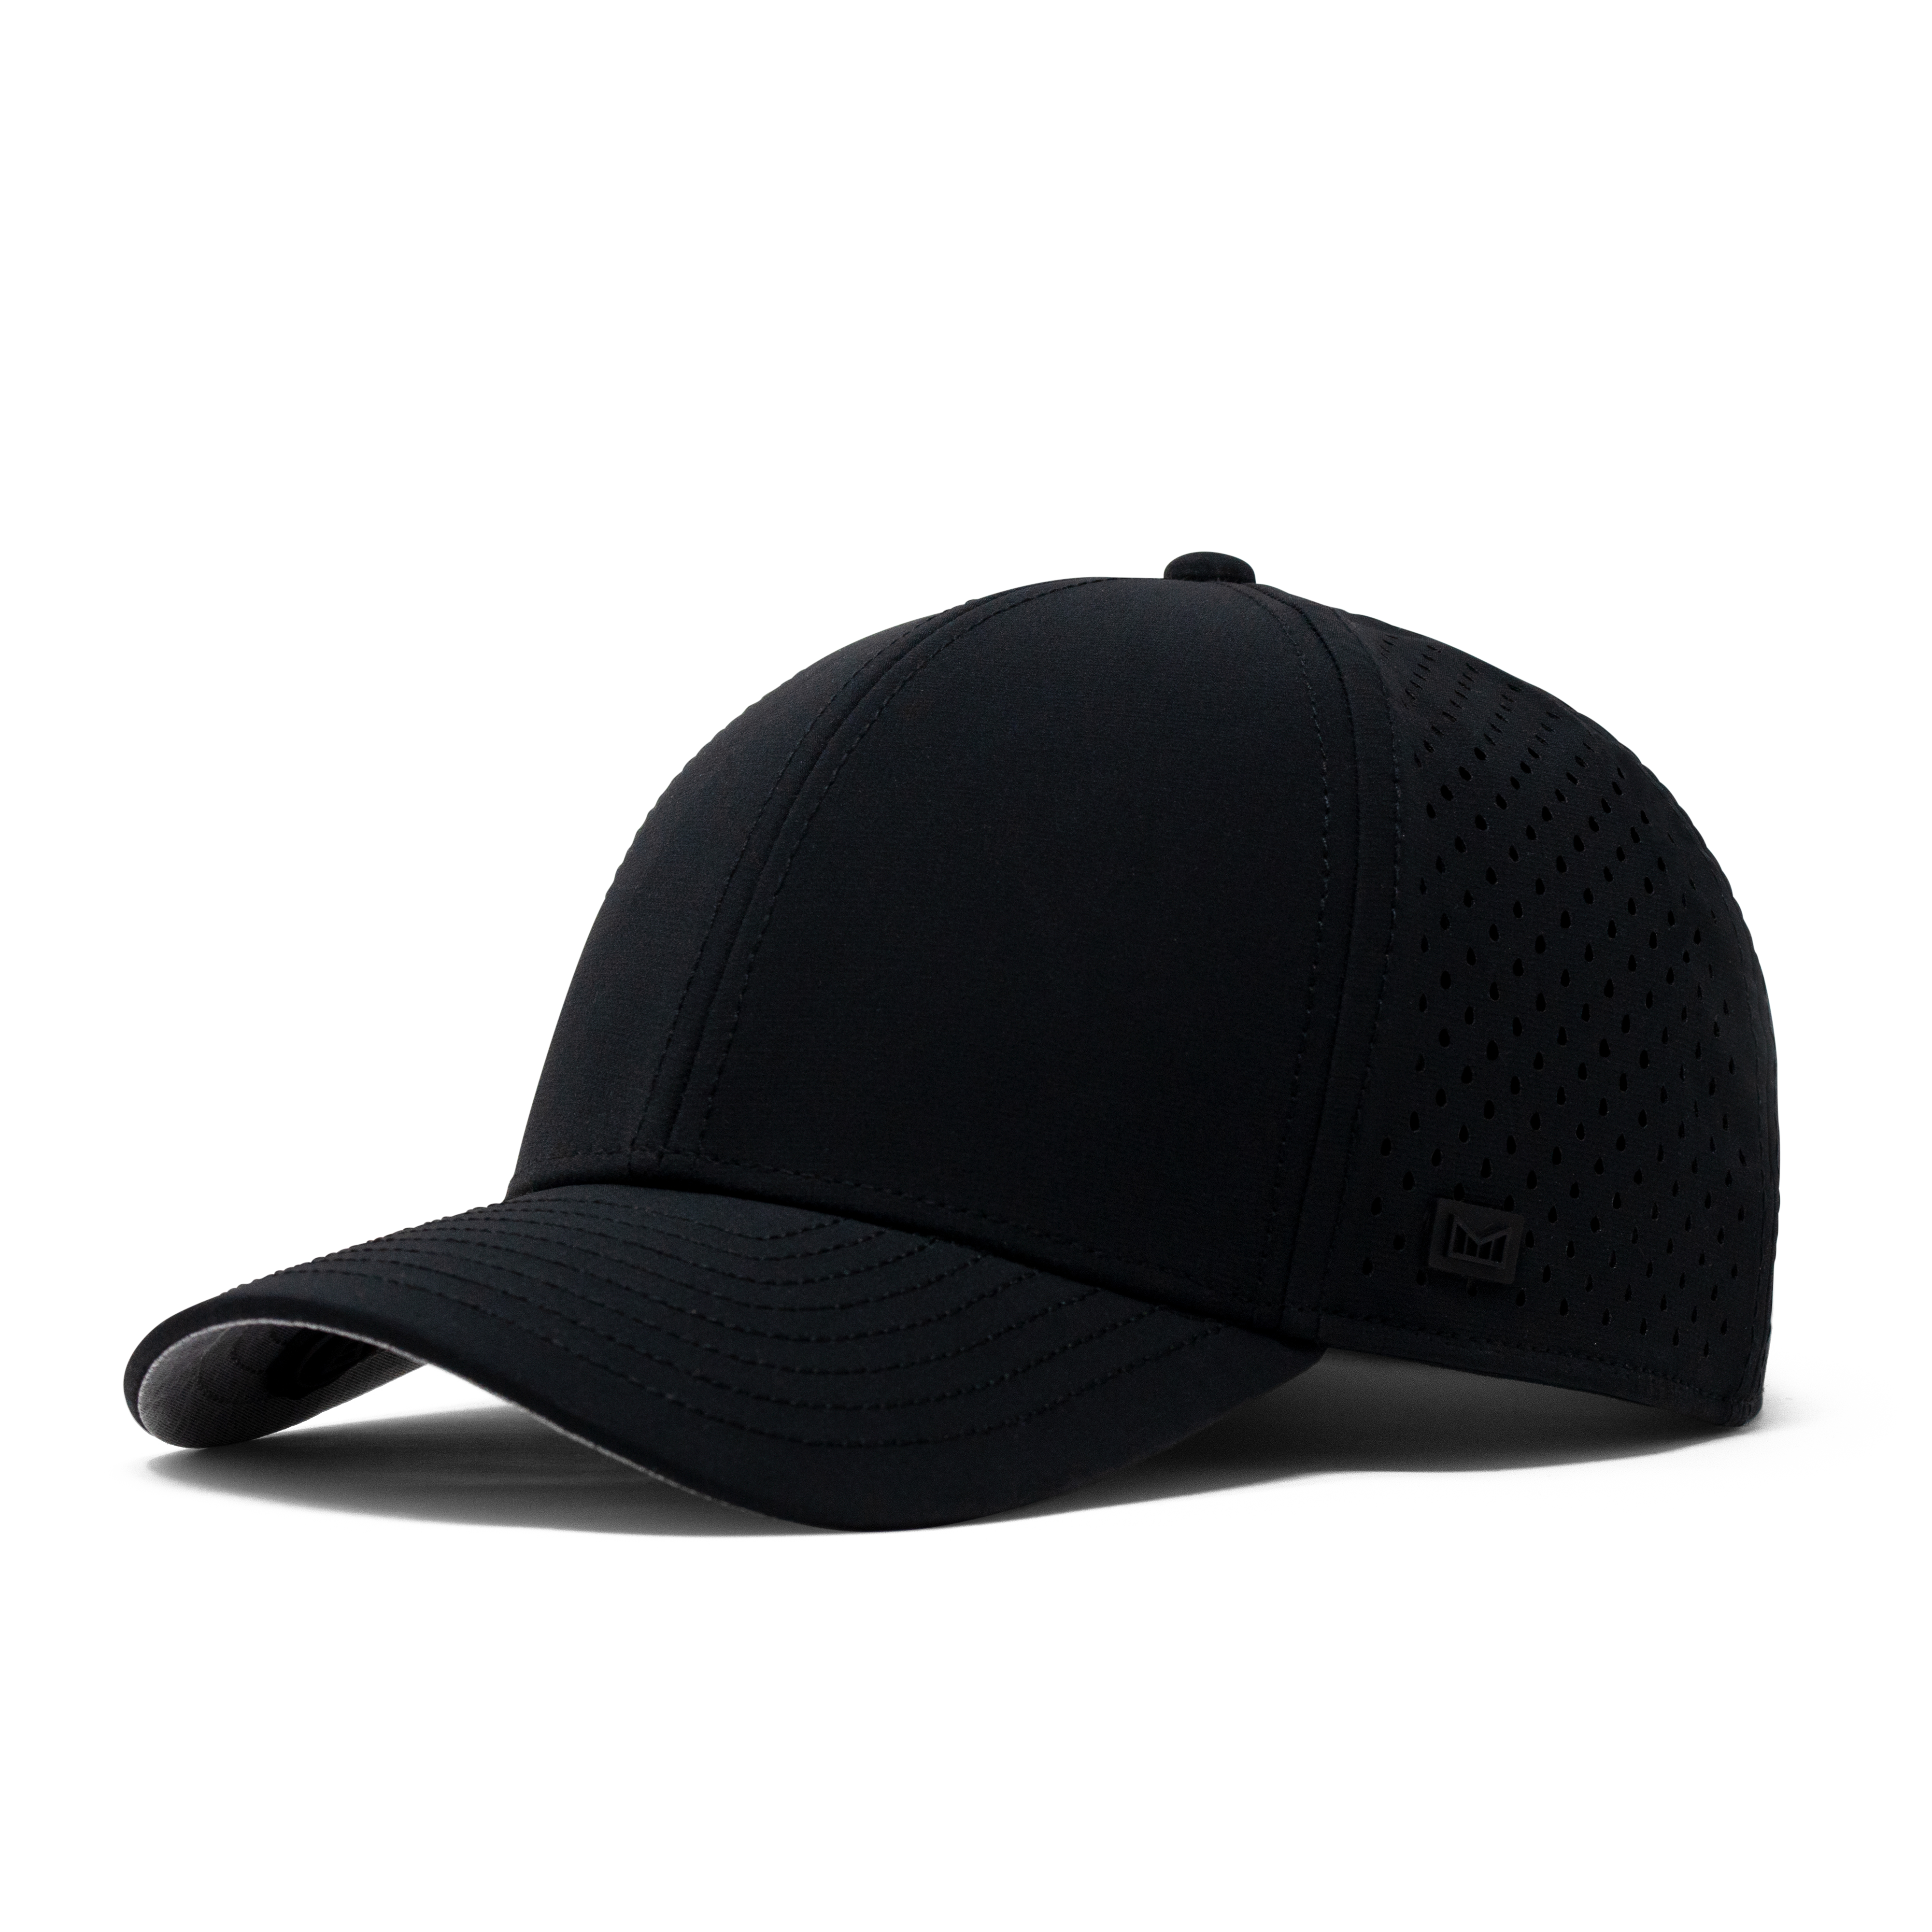 Curved Bill Hats, Exclusive Curved Bill Hats